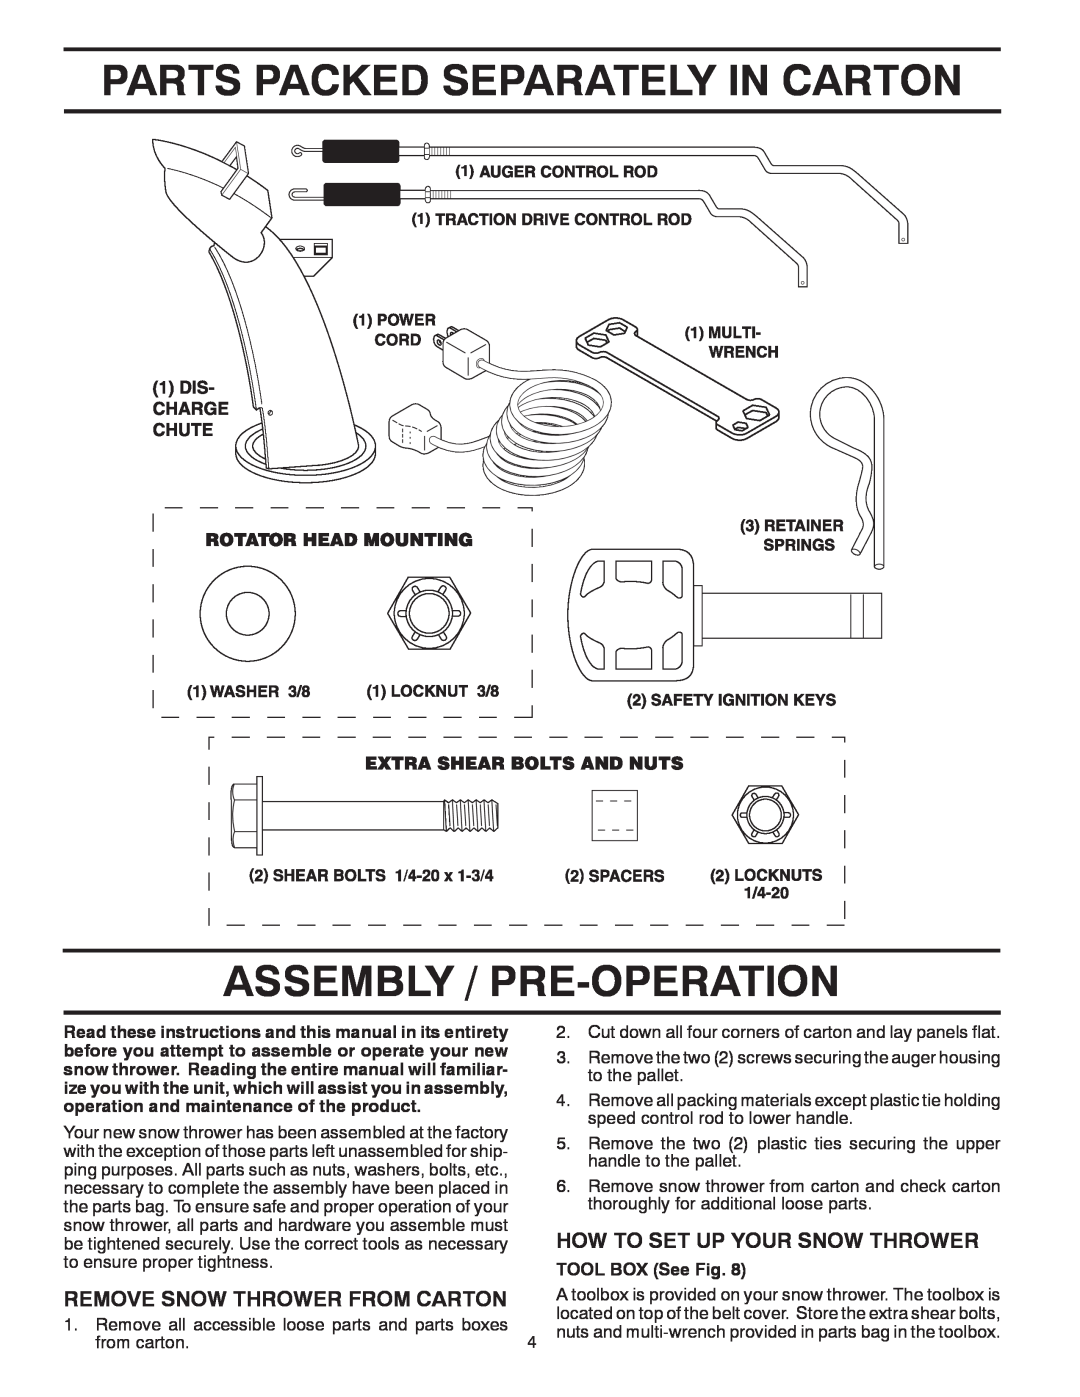 Poulan PR5524ES owner manual Parts Packed Separately In Carton Assembly / Pre-Operation, How To Set Up Your Snow Thrower 